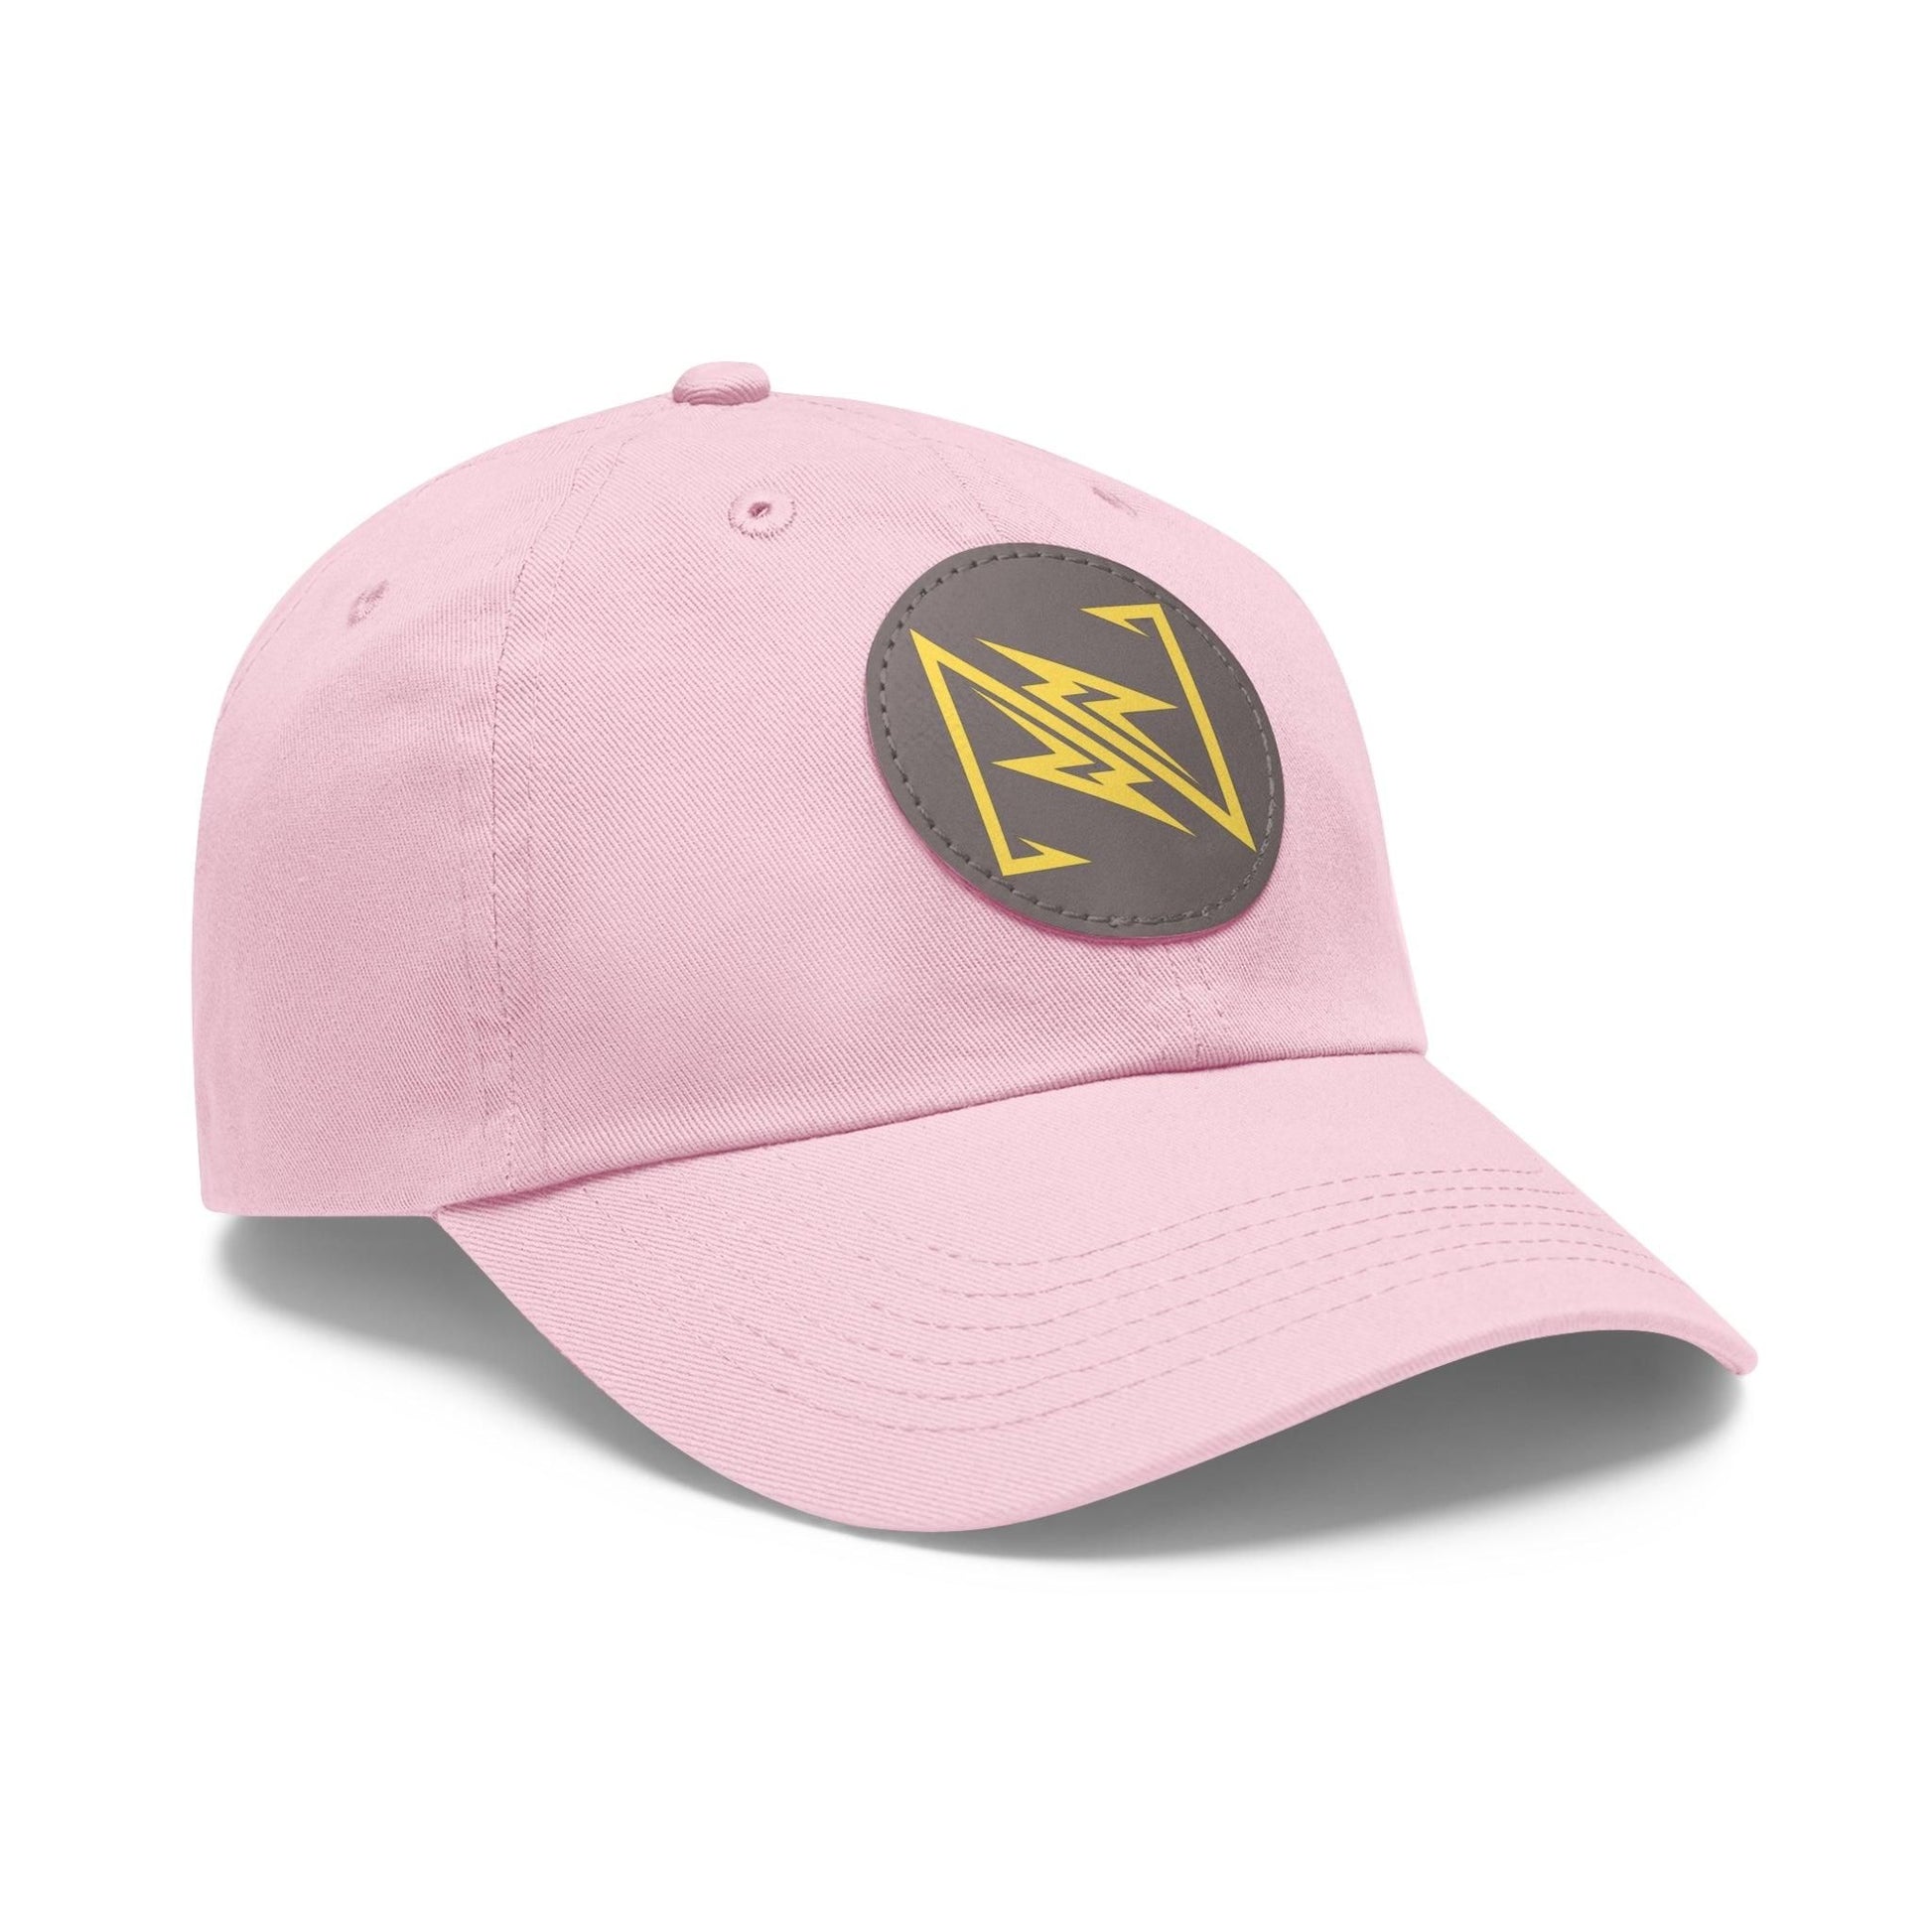 NX Vogue Baseball Hat with Leather Patch Cap Light Pink / Grey patch Circle One size